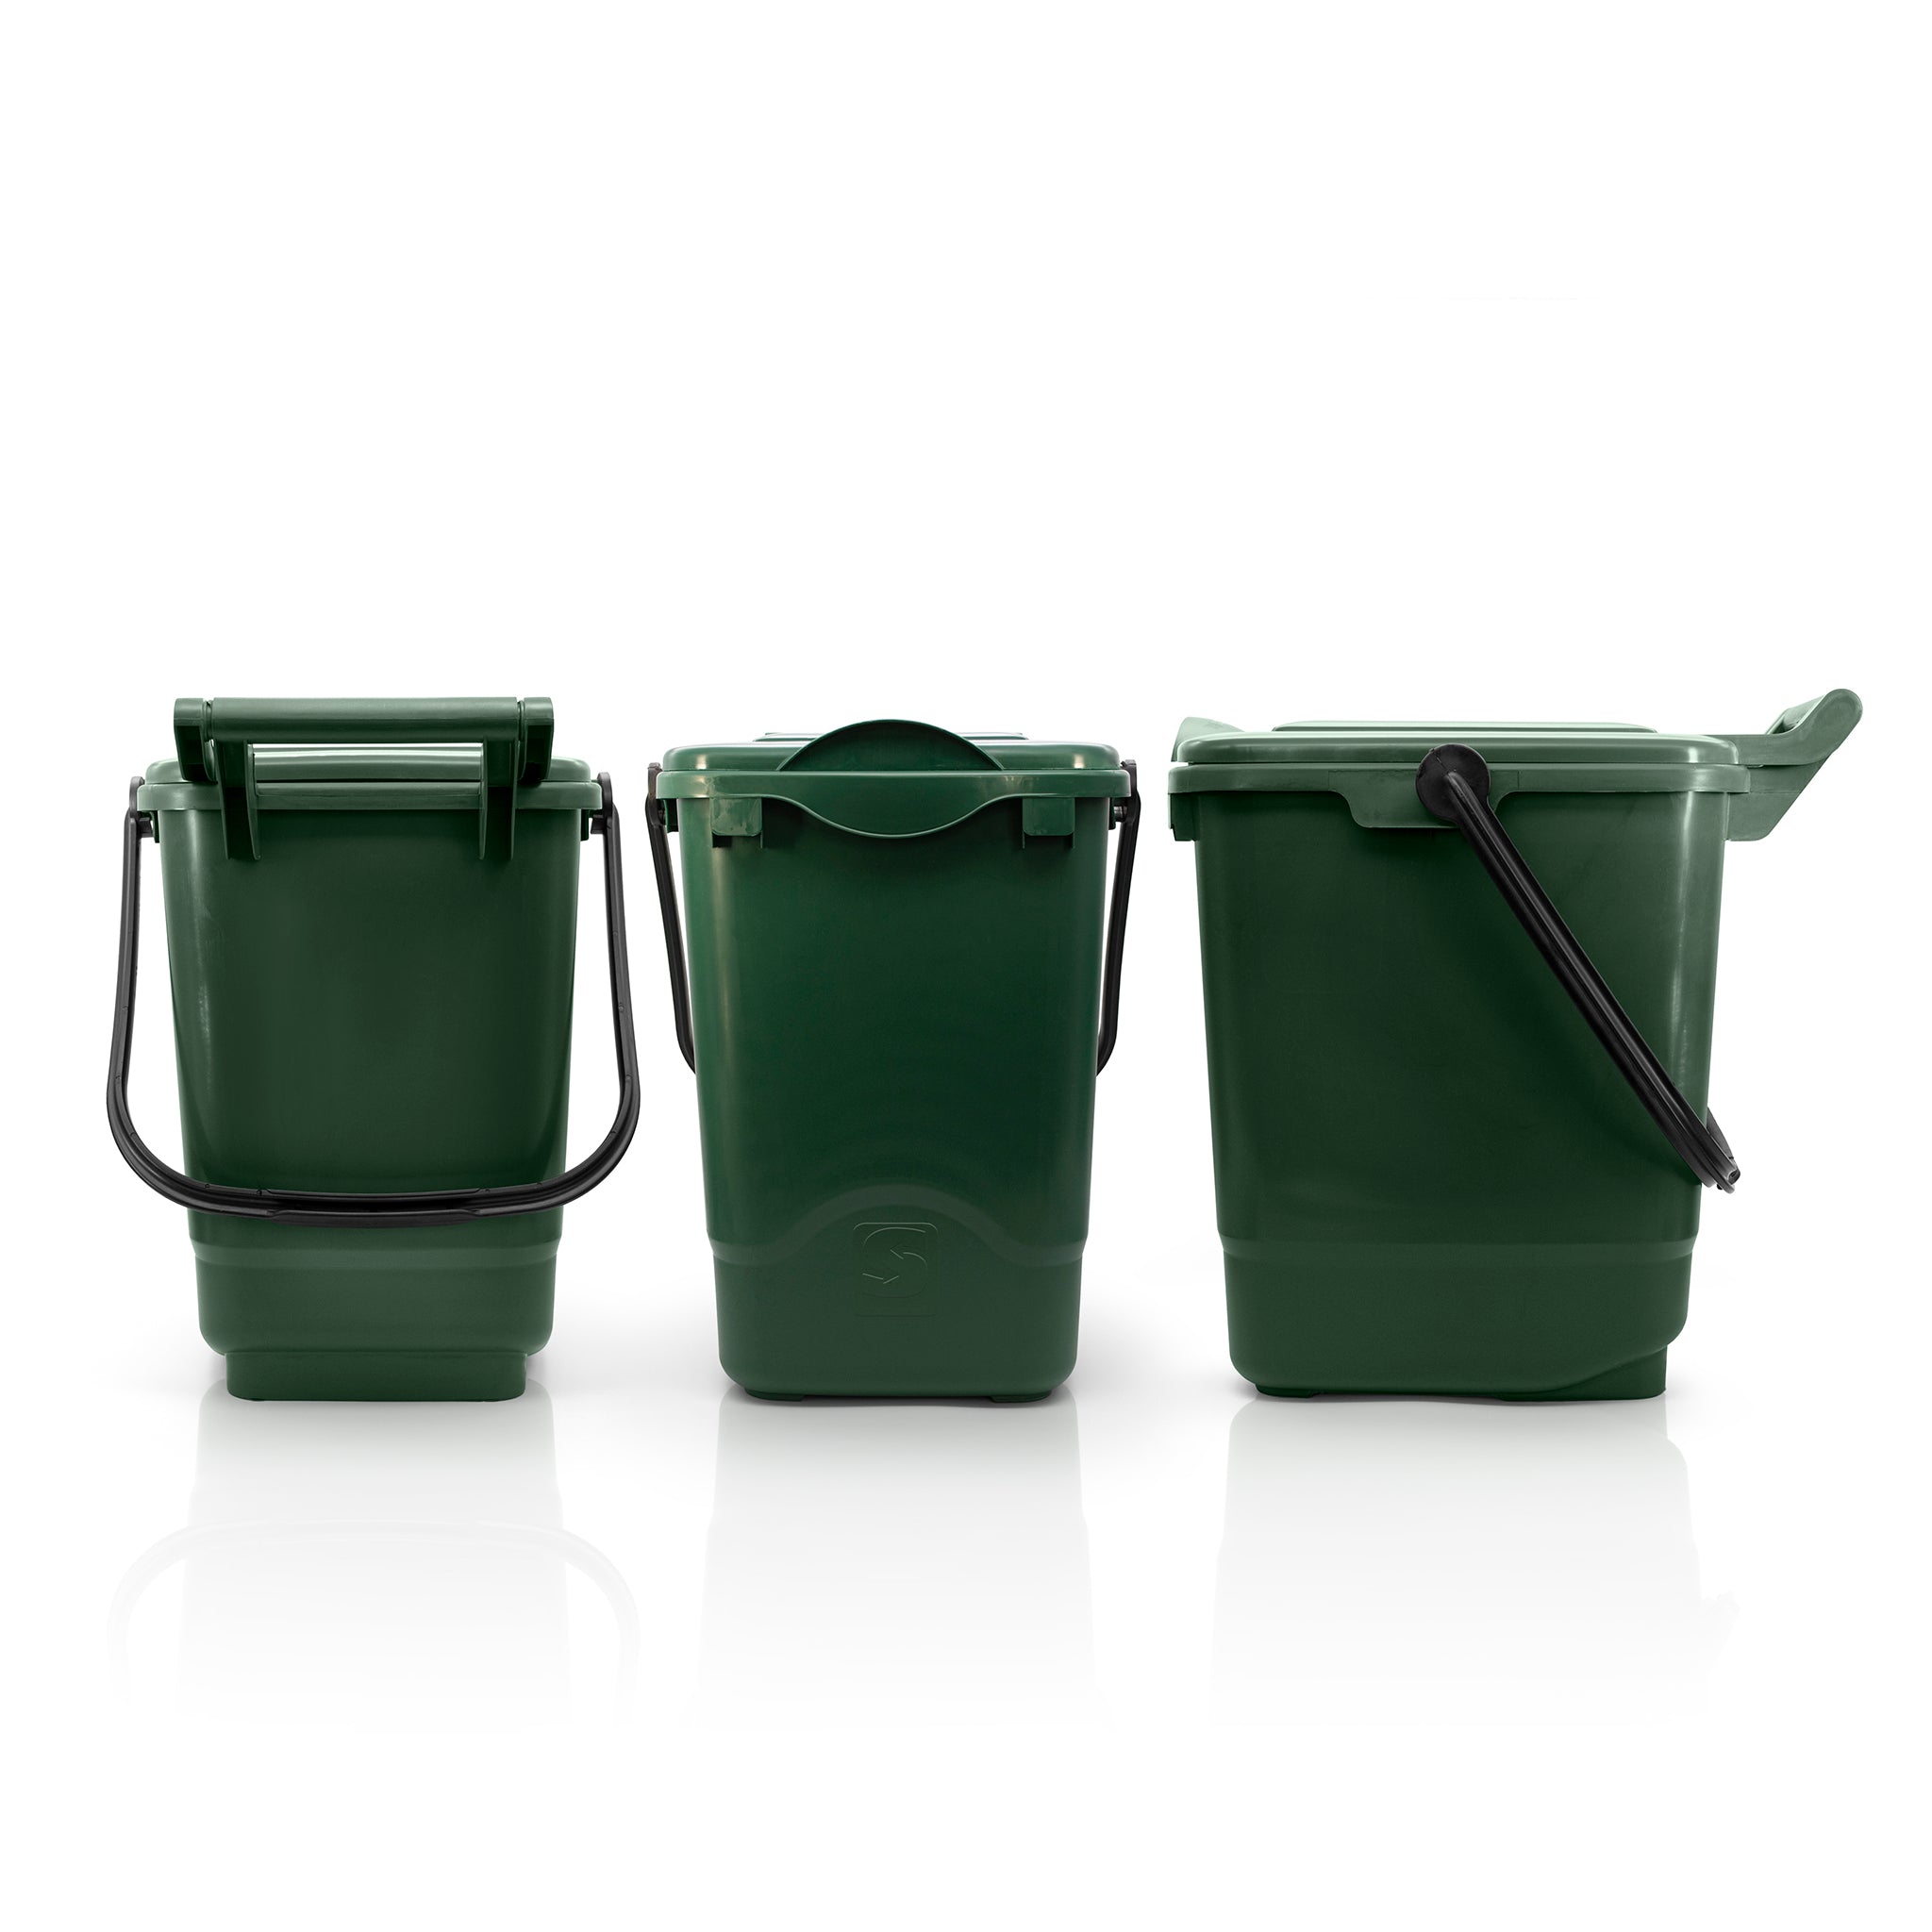 Front, rear, and side of recycled plastic bin with lid 